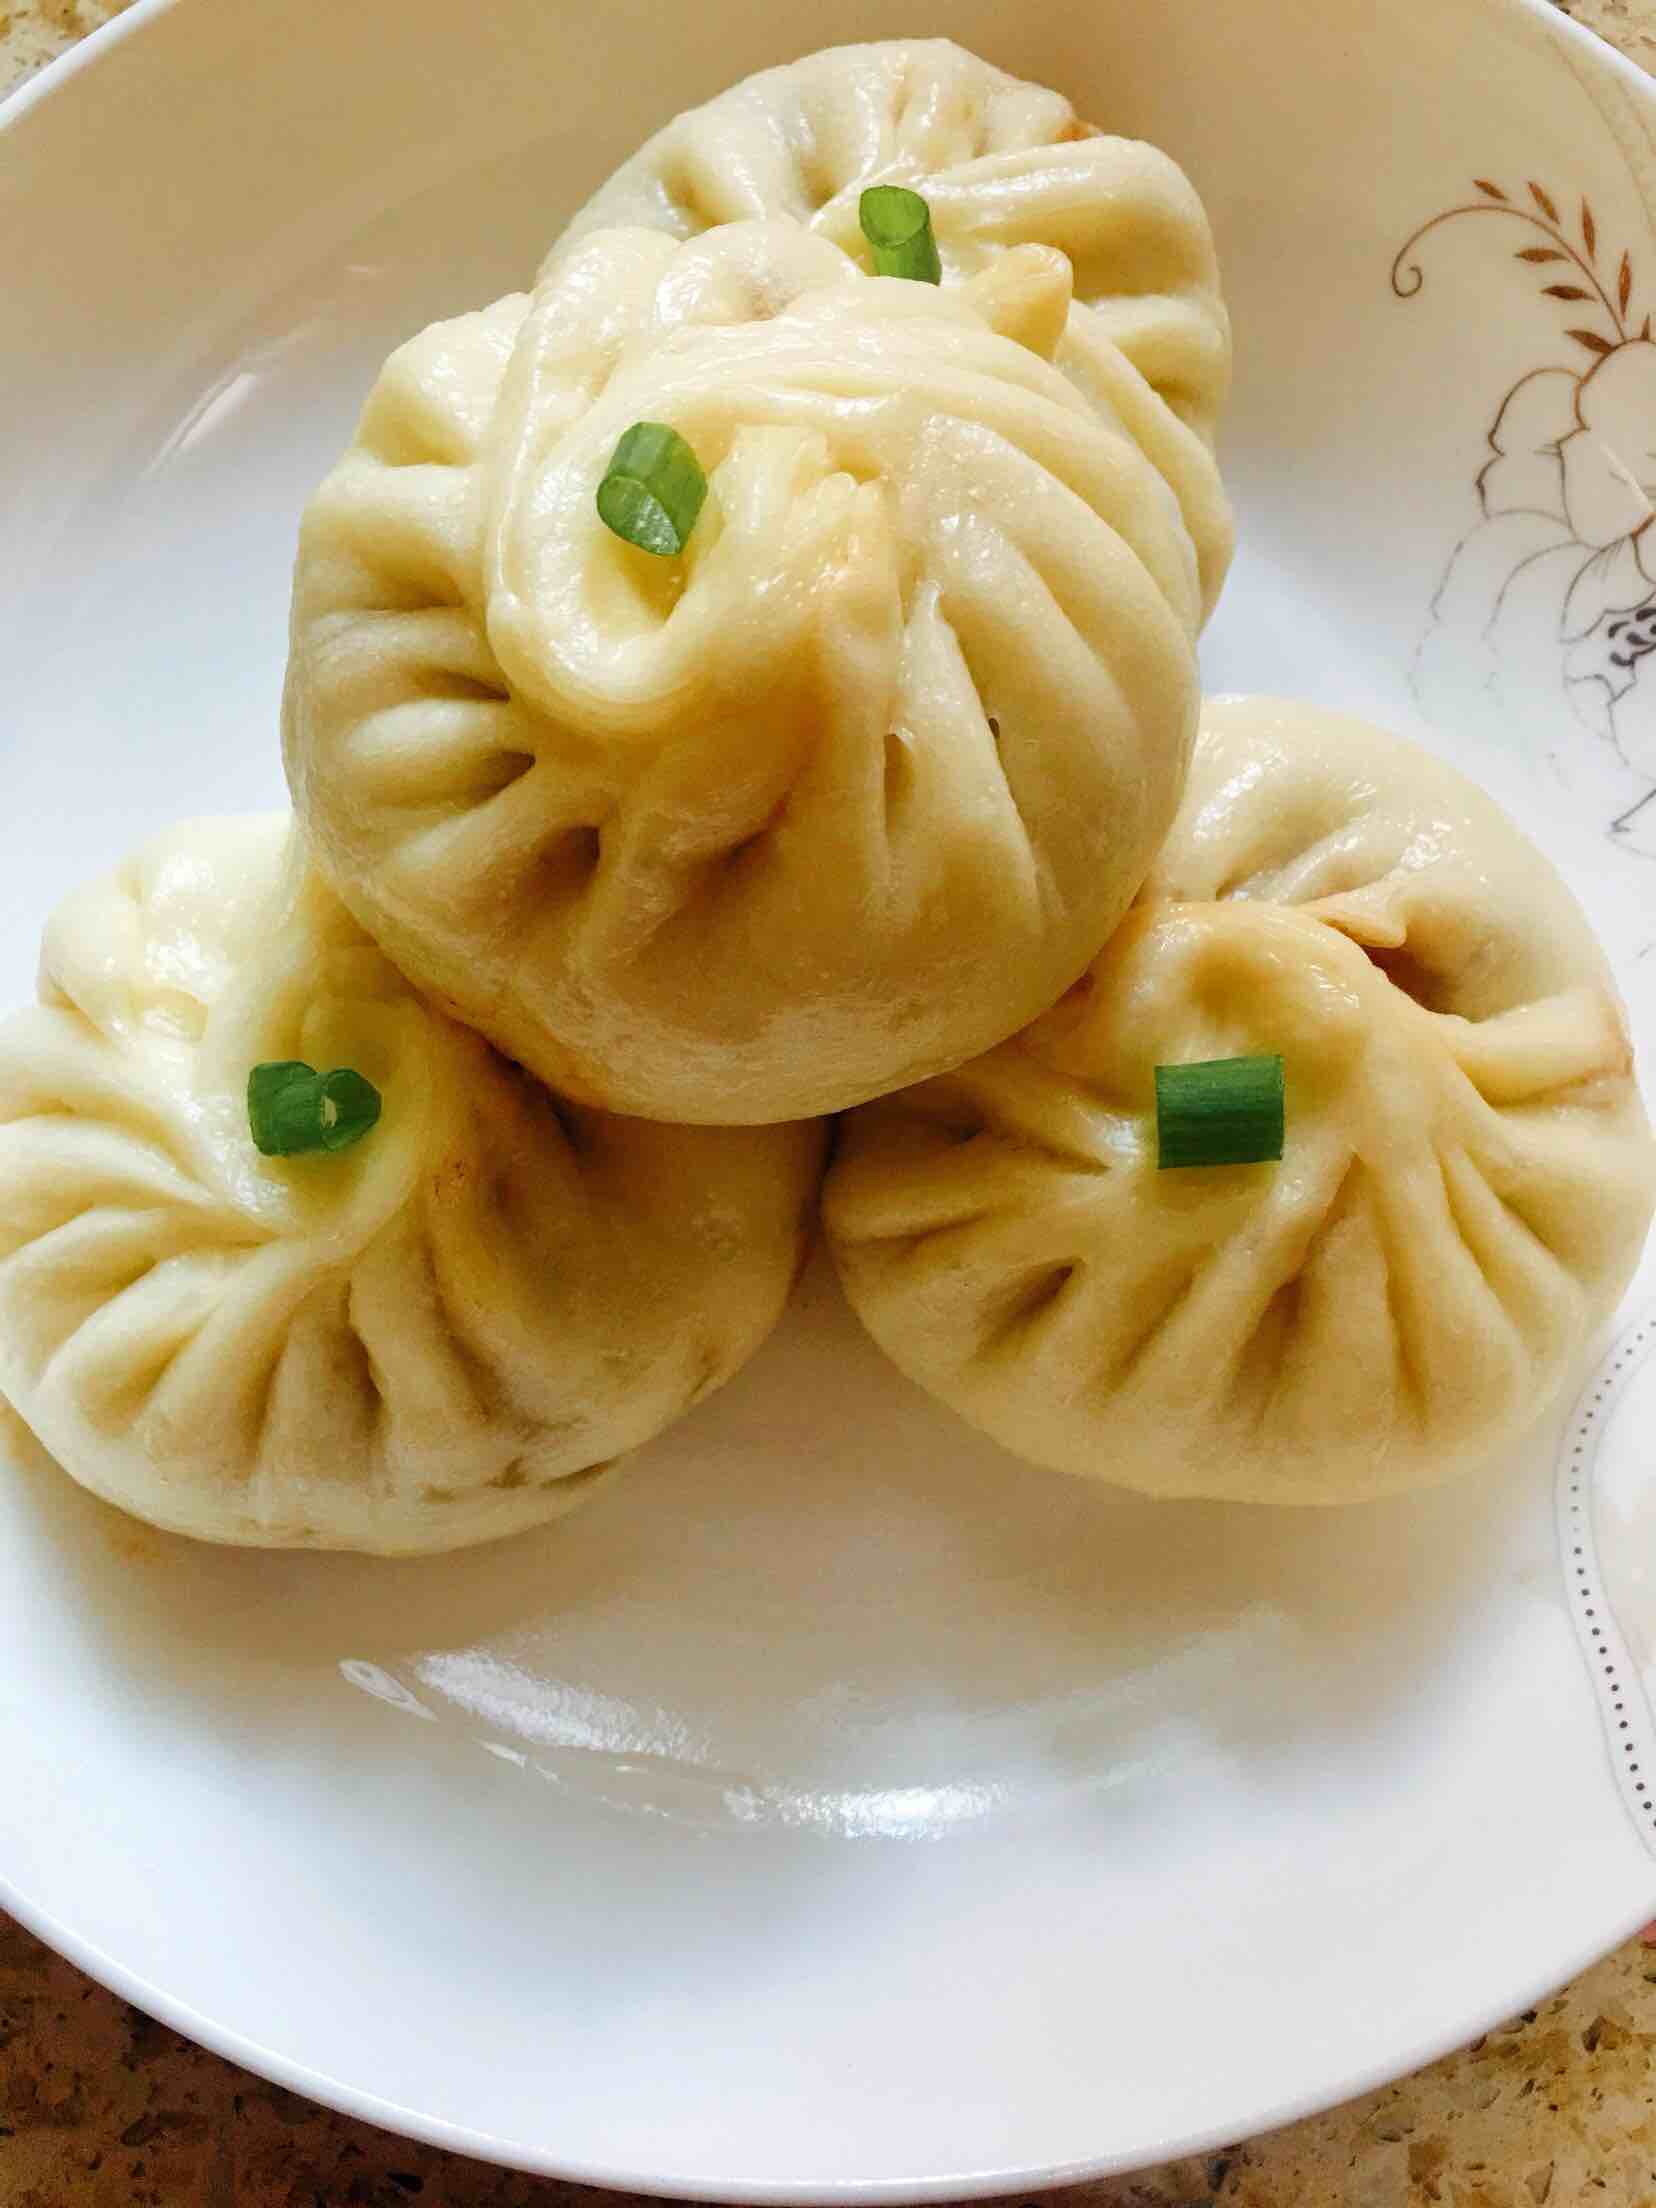 Cabbage and Pork Stuffed Buns